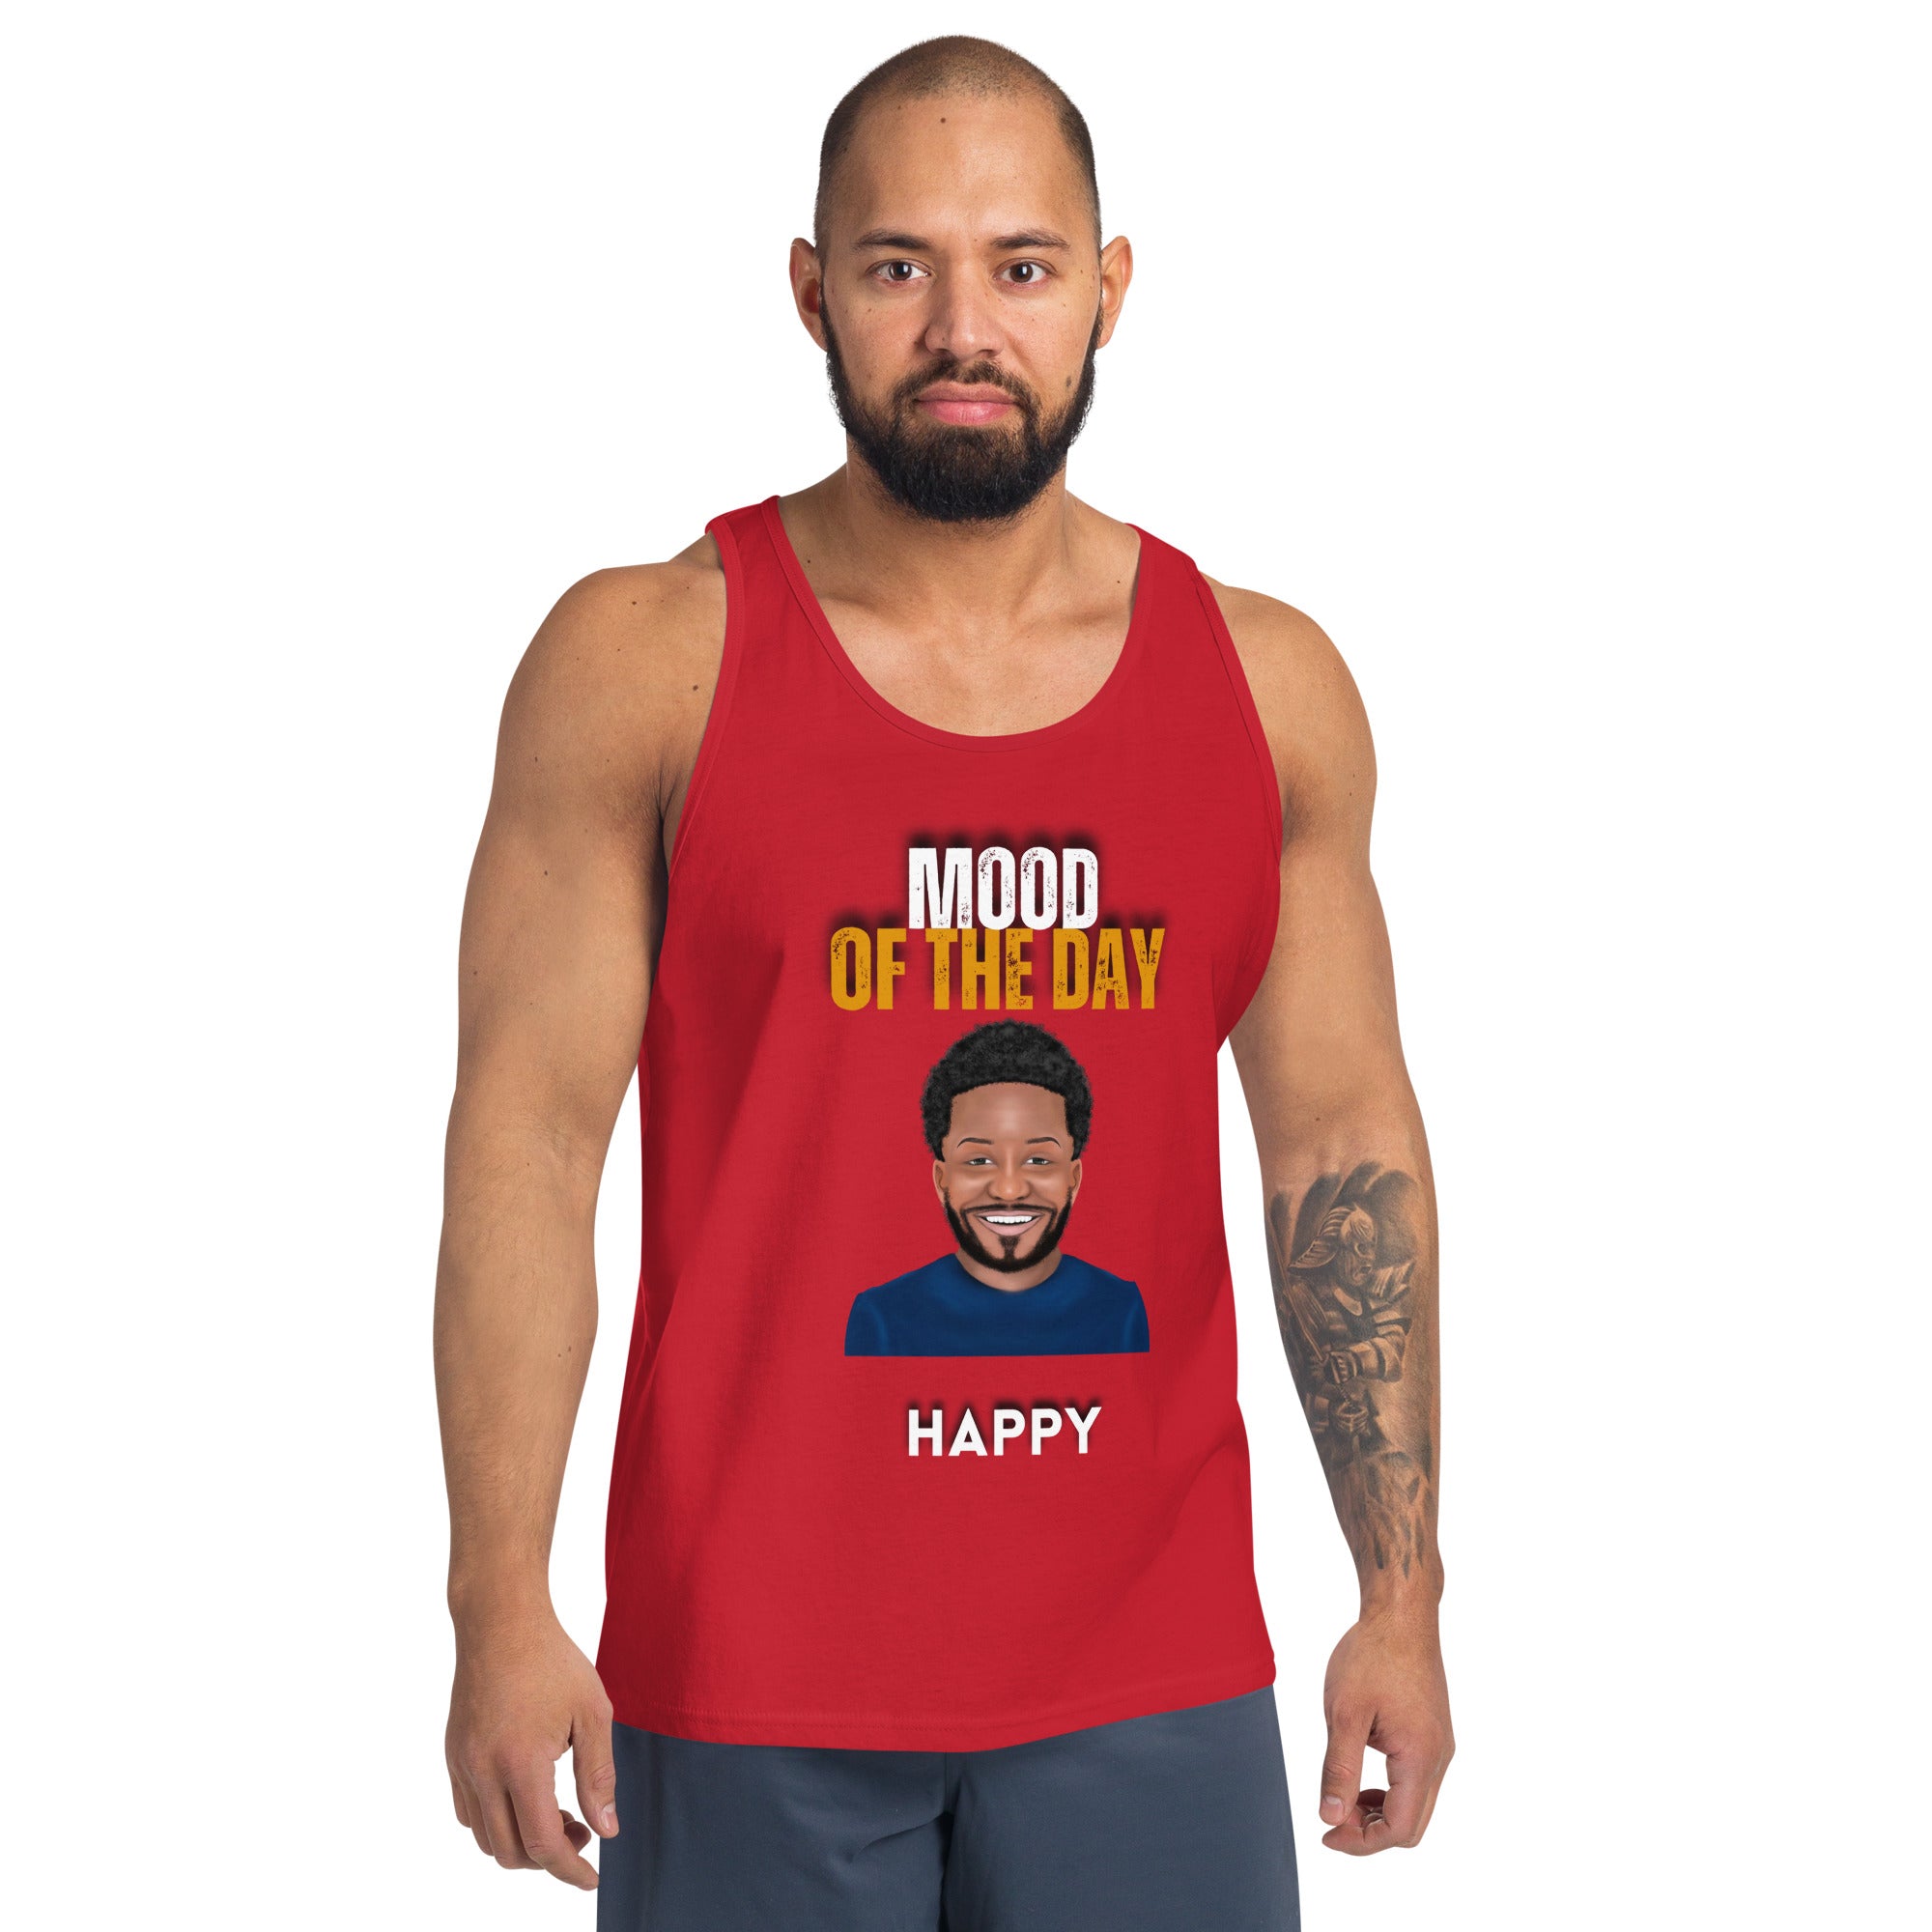 Mood of the Day Tank Top - Happy